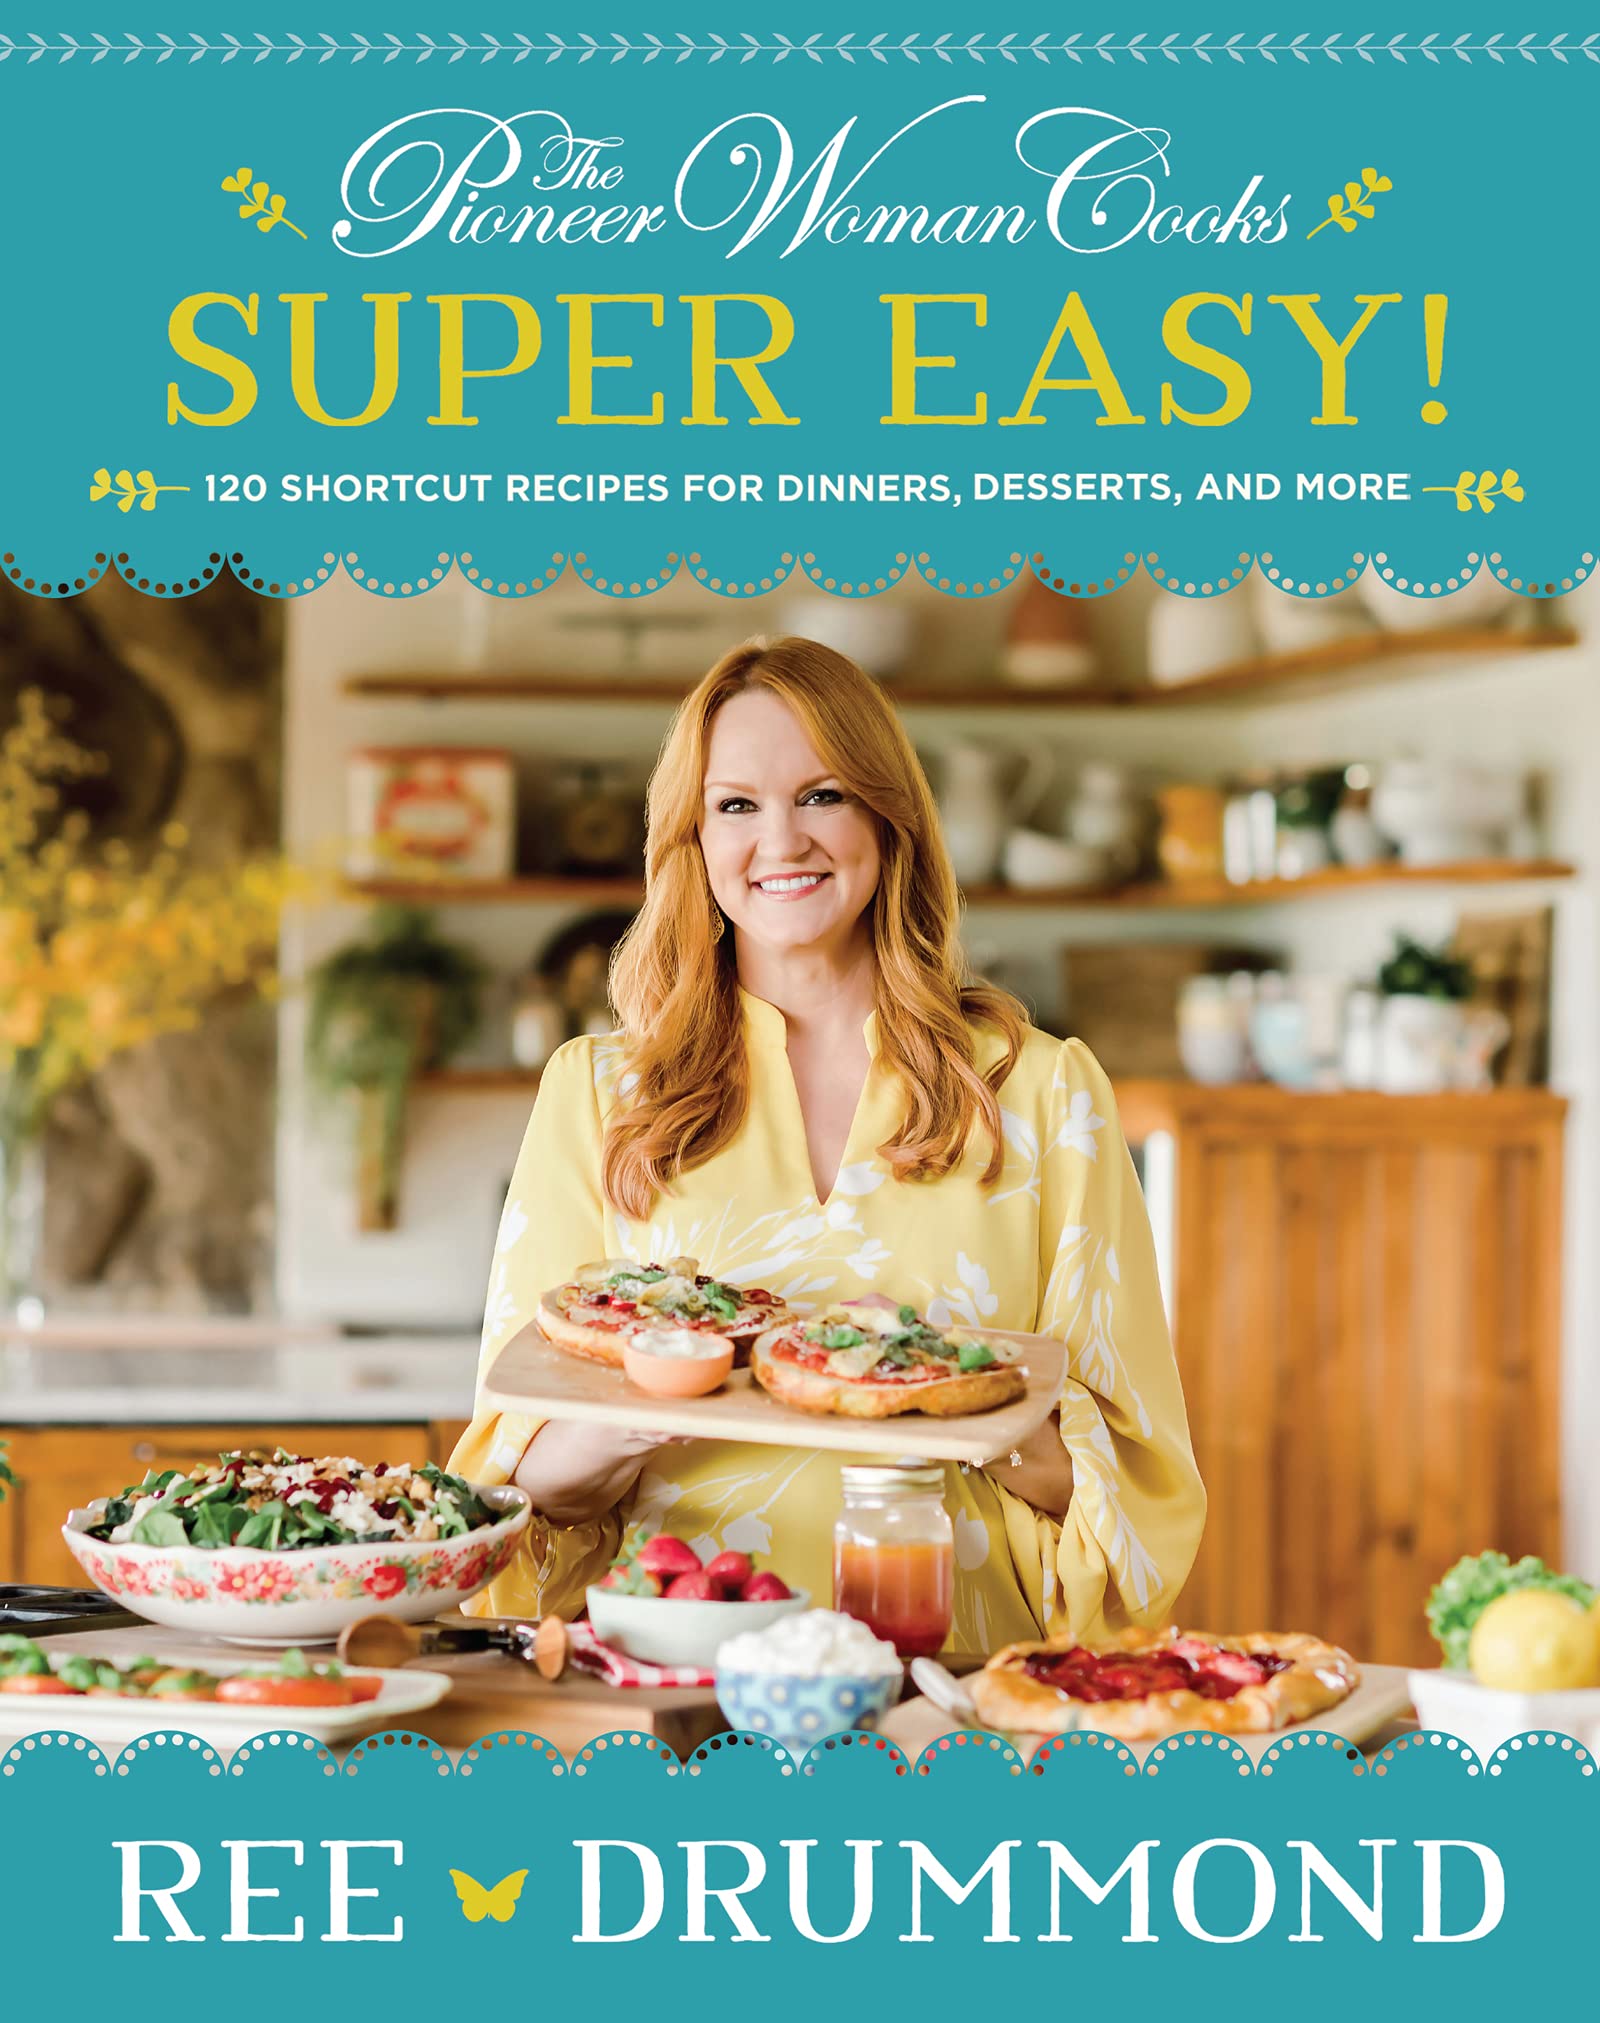 Image for "The Pioneer Woman Cooks--Super Easy!"